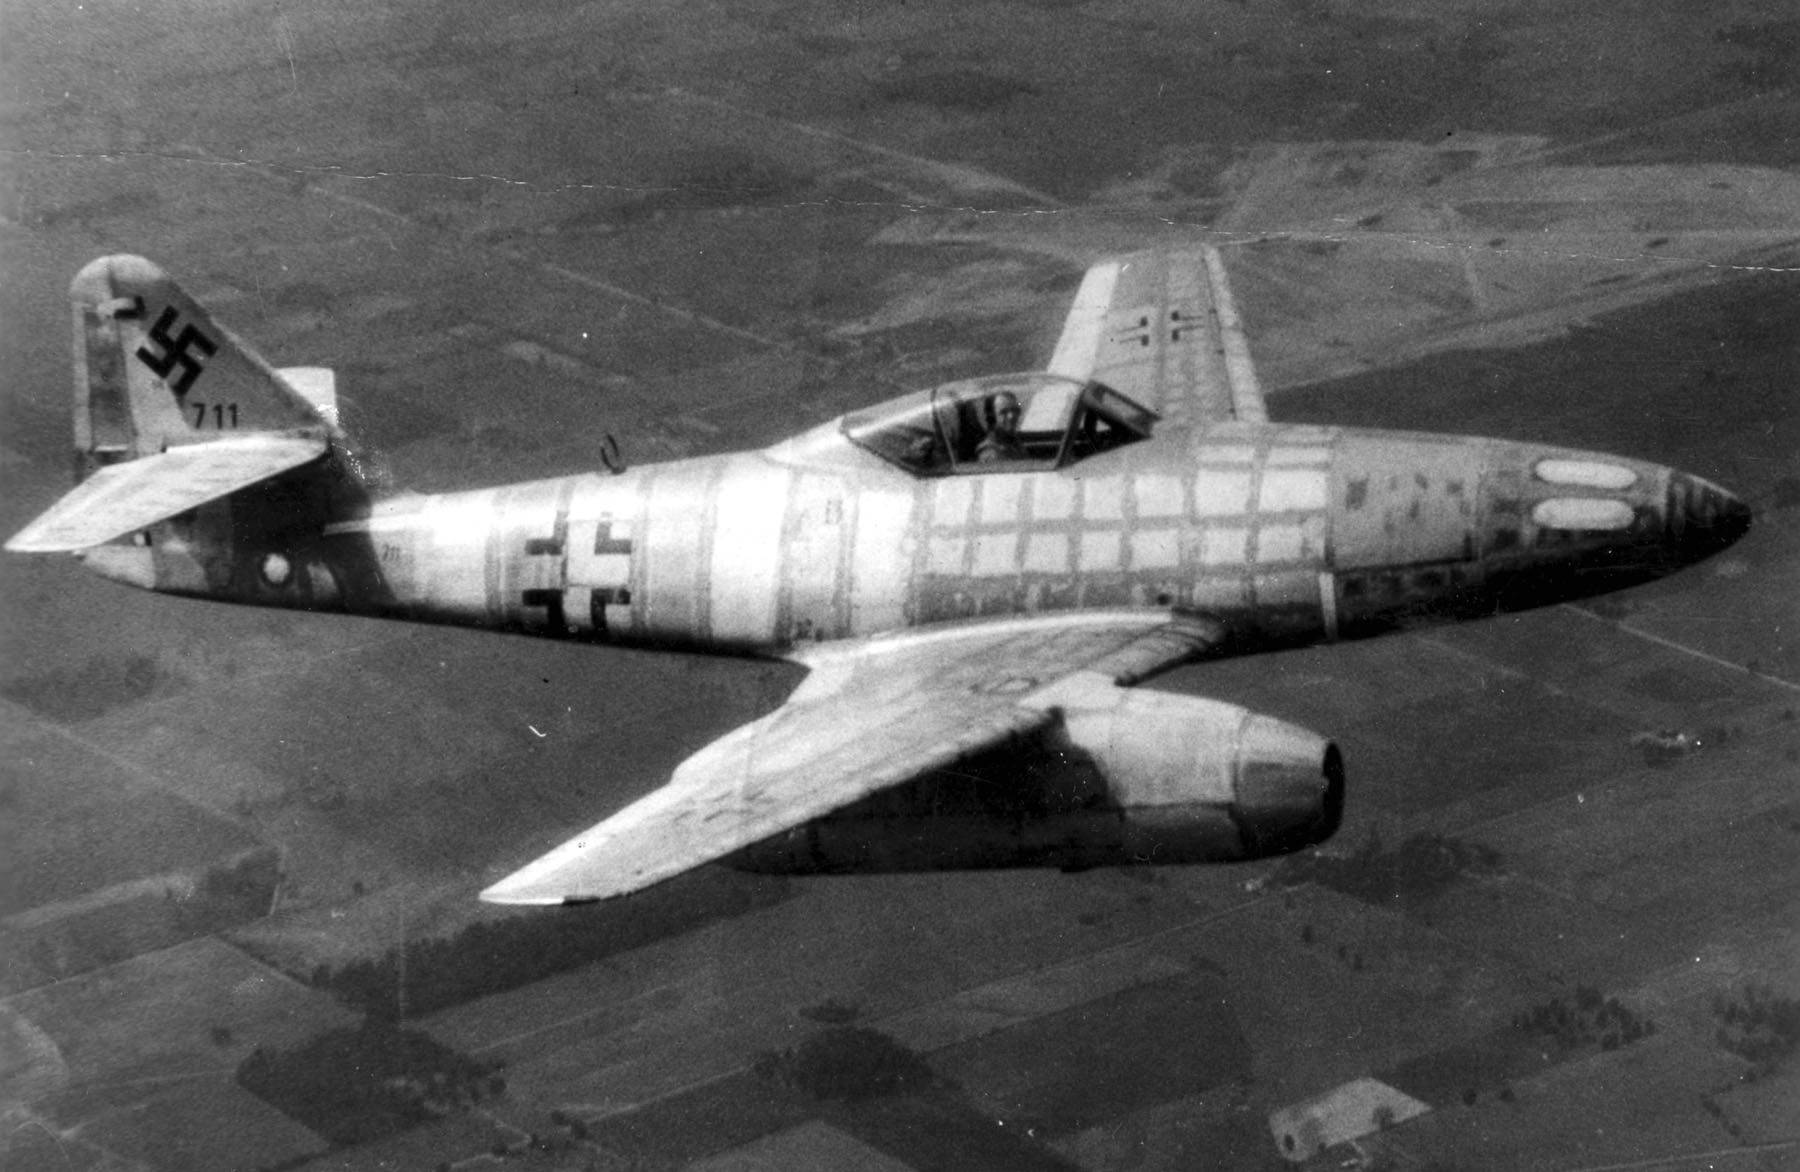 messerschmitt_me_262_schwalbe-werk-nr-111711-test-flight-in-the-usa-it-was-the-first-intact-me-262-to-fall-into-allied-hands-on-march-31st-1945.jpg